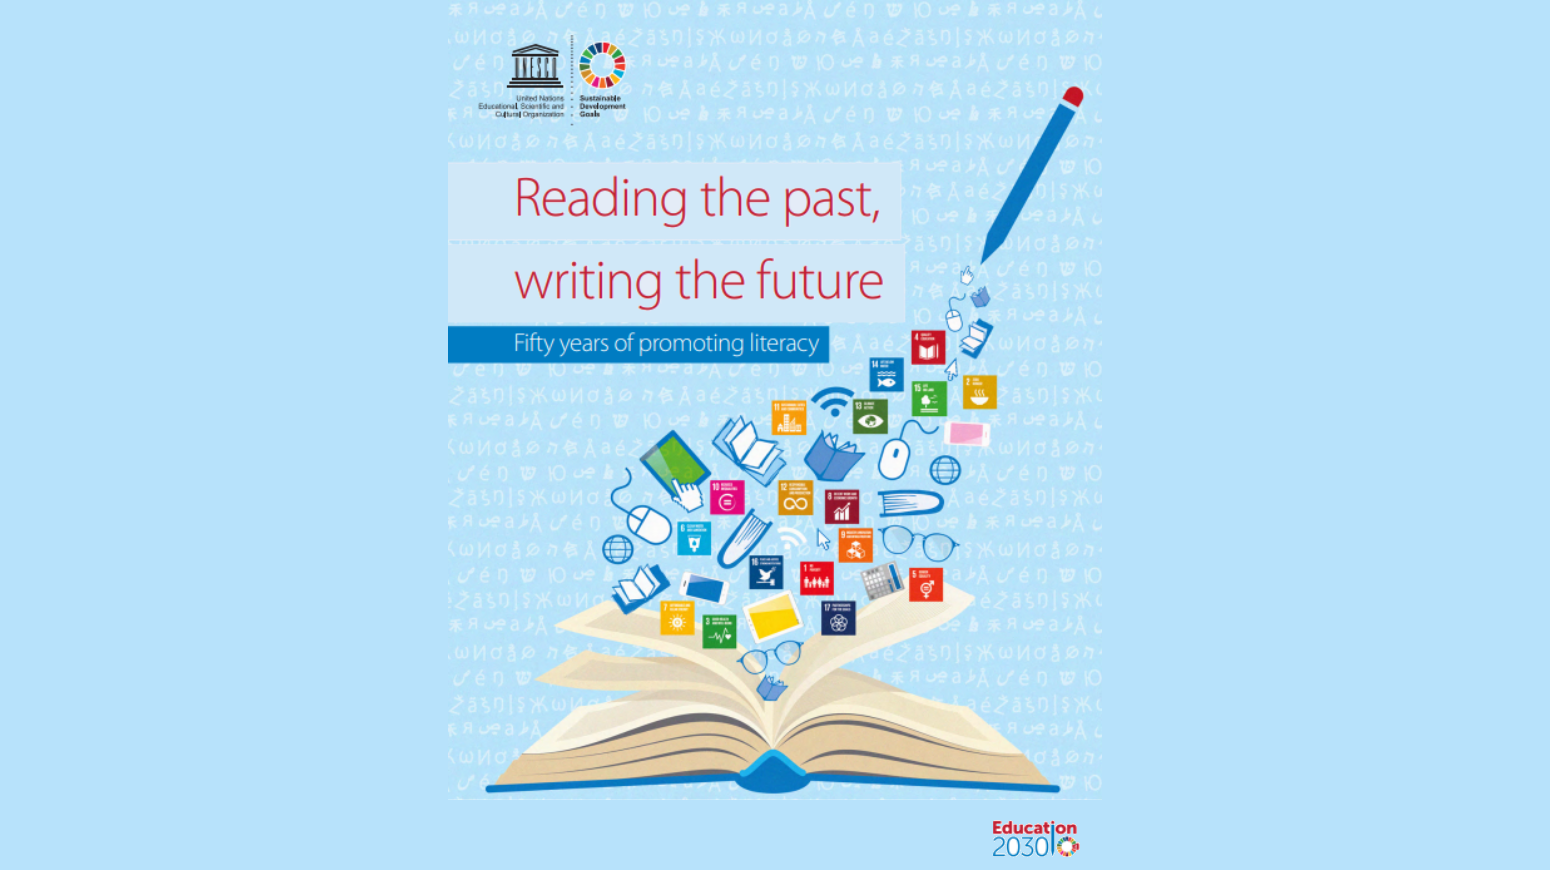 Reading the past, writing the future - Fifty years of promoting literacy